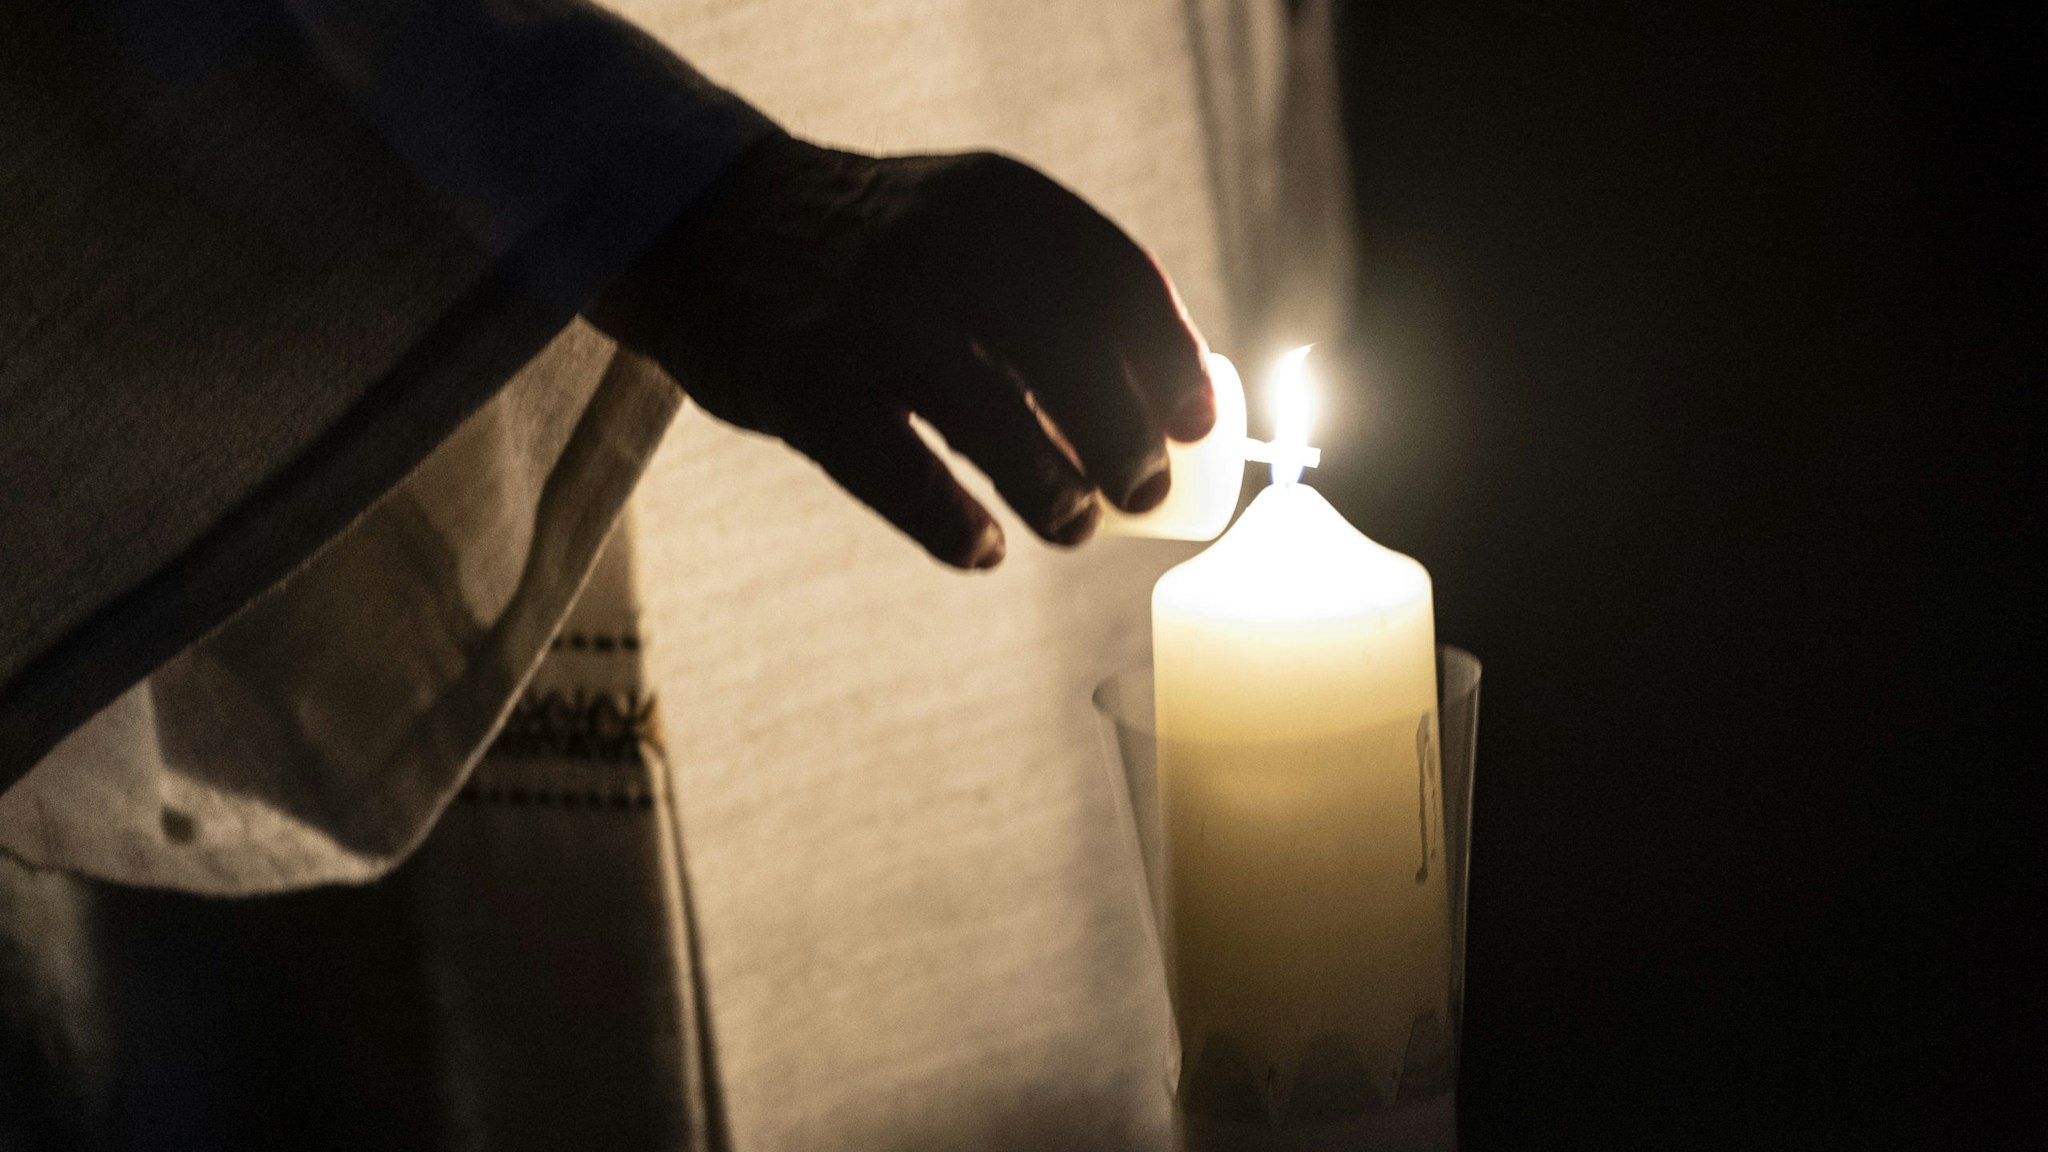 11 April 2020, Baden-Wuerttemberg, St. Peter: Pastor Klemens Armbruster lights a candle in the monastery church. Because of the coronavirus pandemic, the Easter Vigil services are held without an audience. Photo: Patrick Seeger/dpa (Photo by Patrick Seeger/picture alliance via Getty Images)